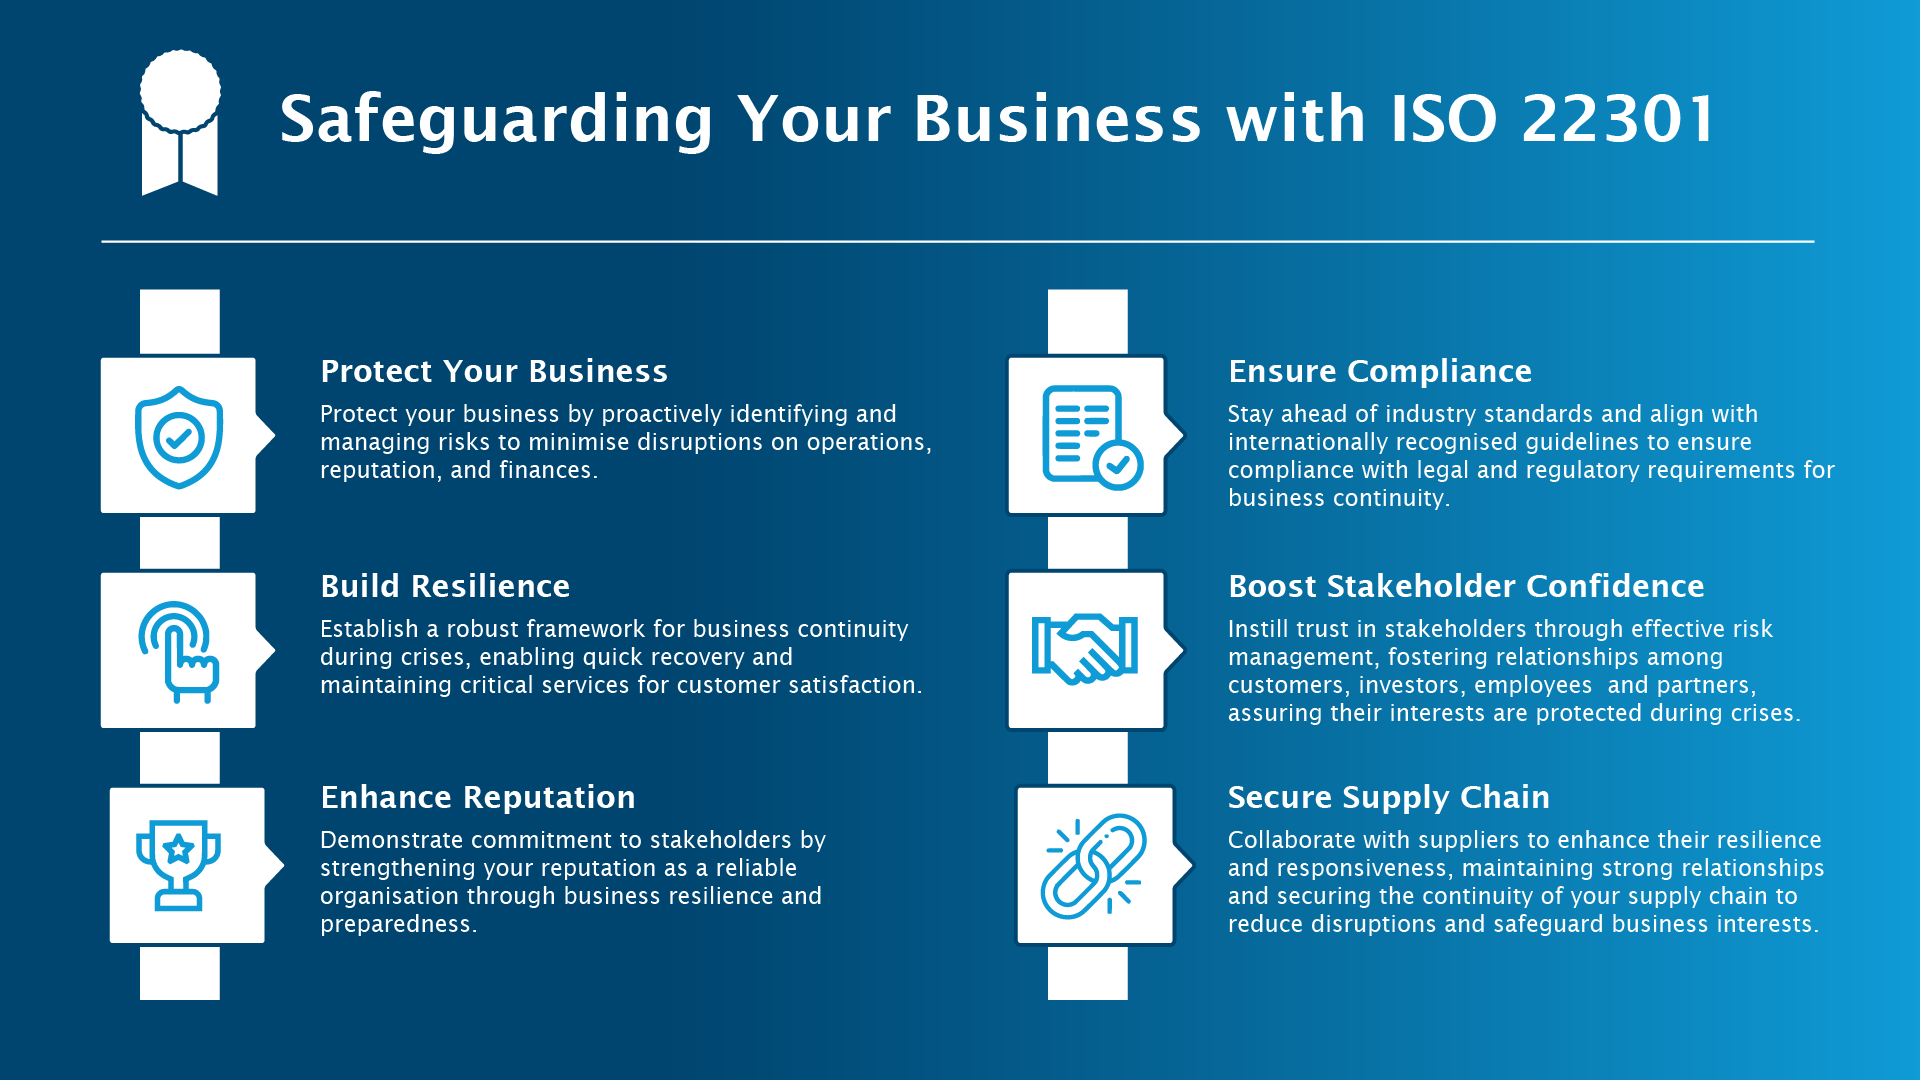 Safeguarding Your Business with ISO 22301